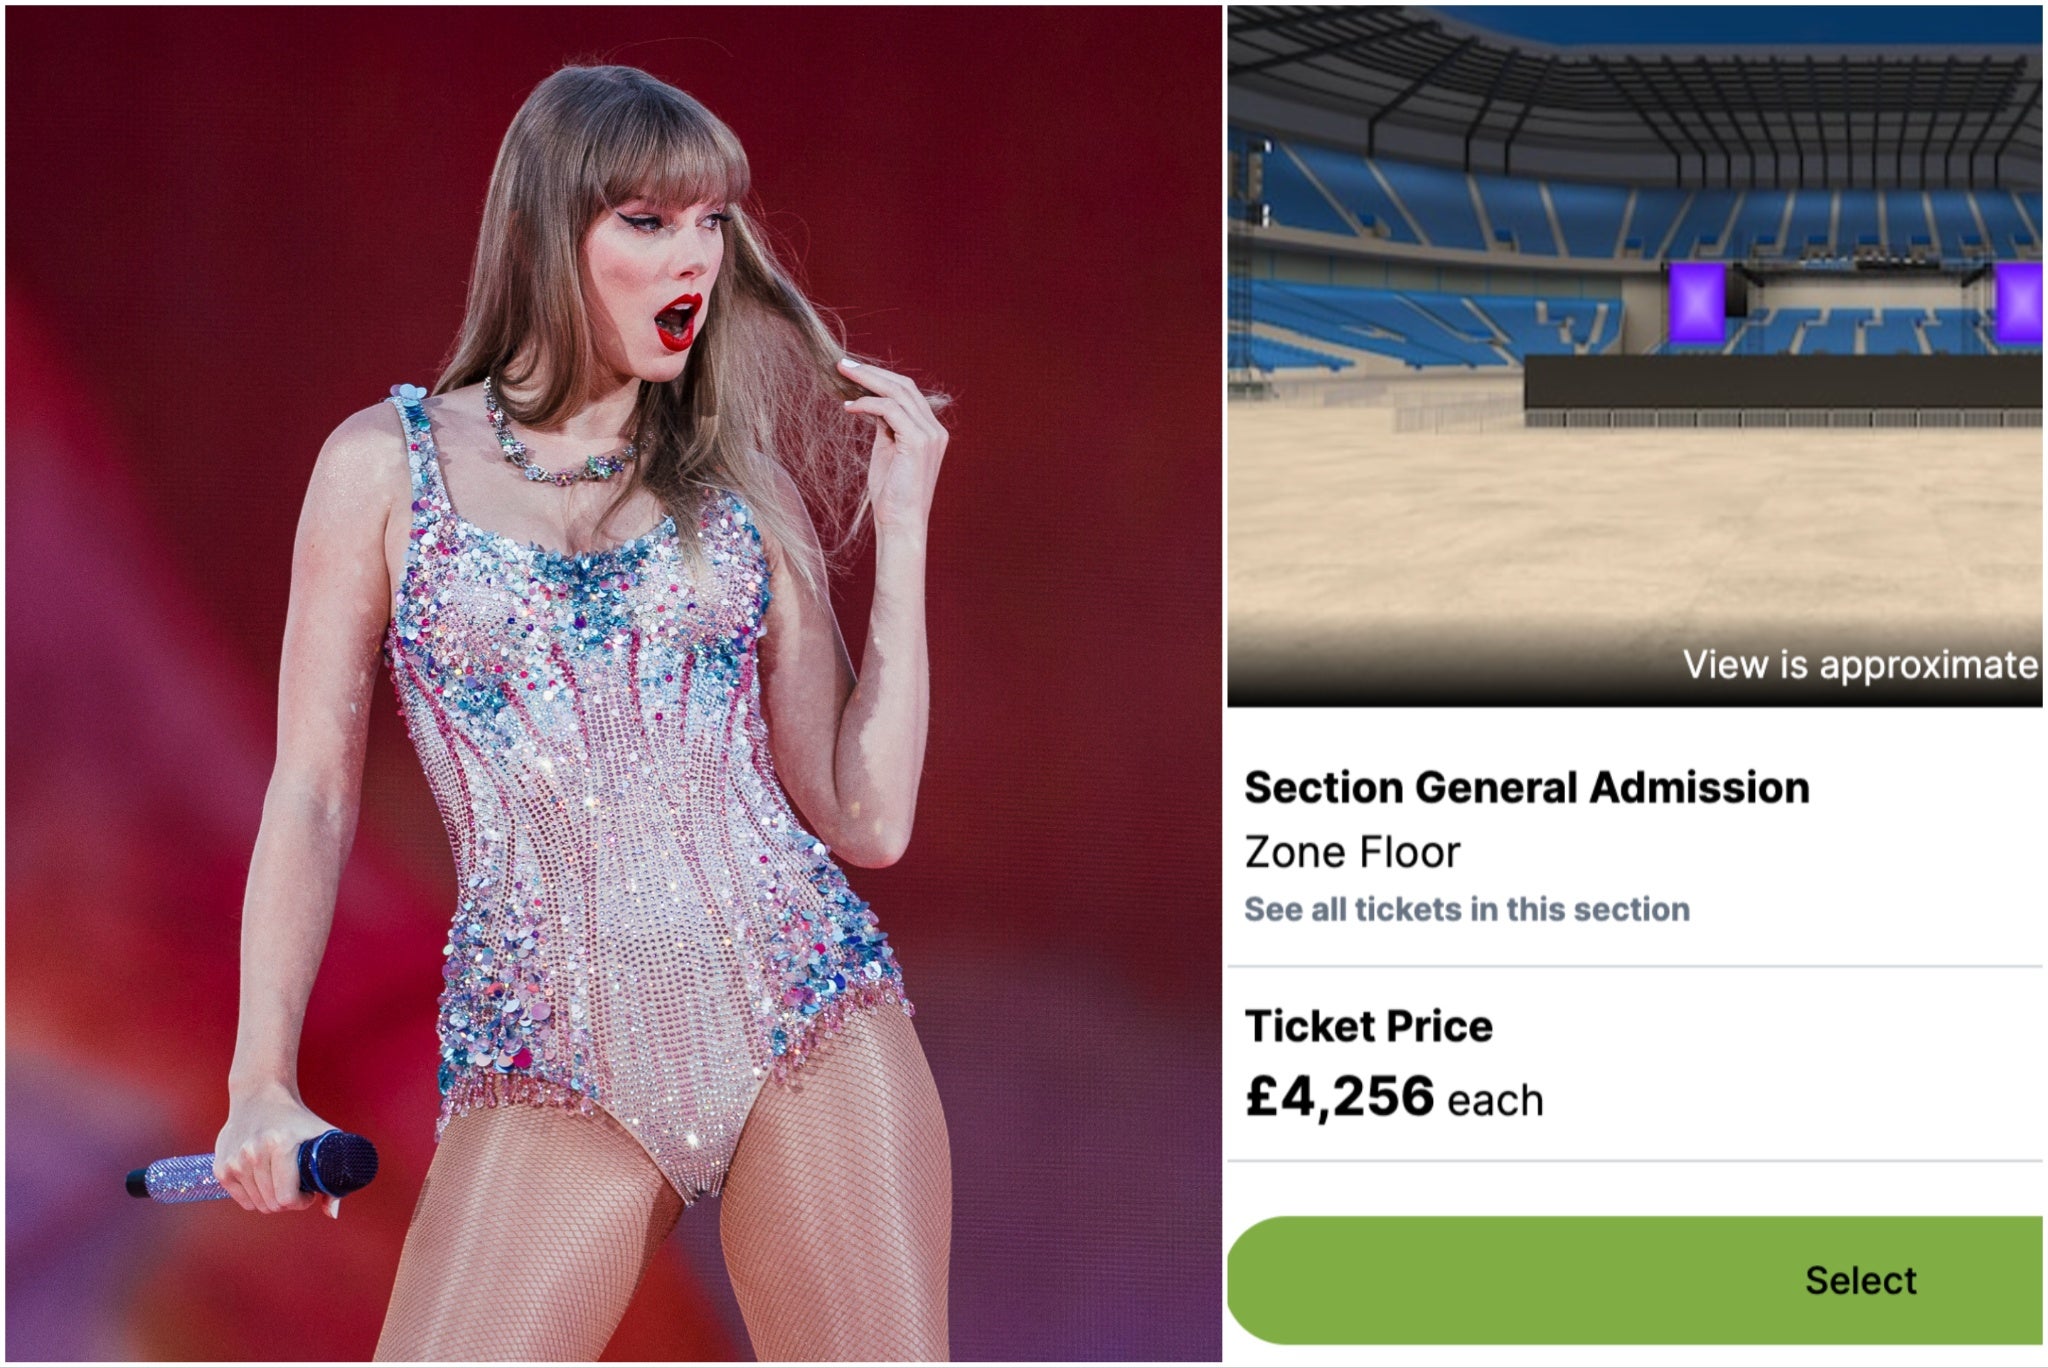 Taylor Swift fans are at risk of being ripped off by opportunists